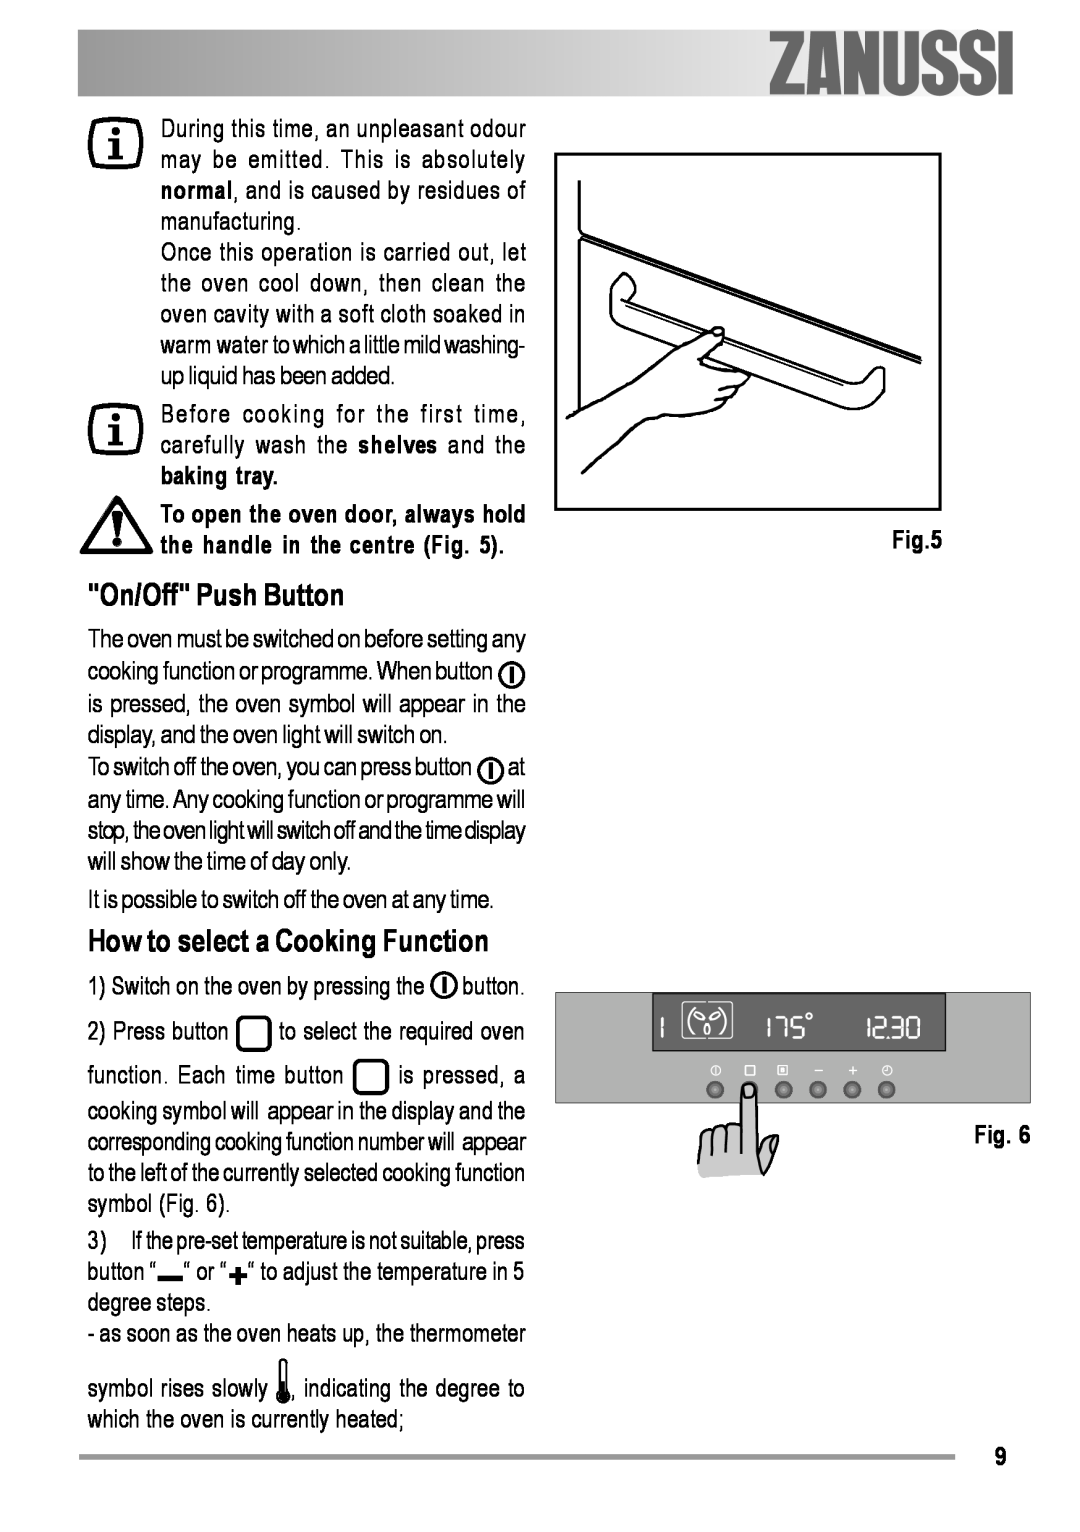 Zanussi ZOB 594 manual On/Off Push Button, How to select a Cooking Function 